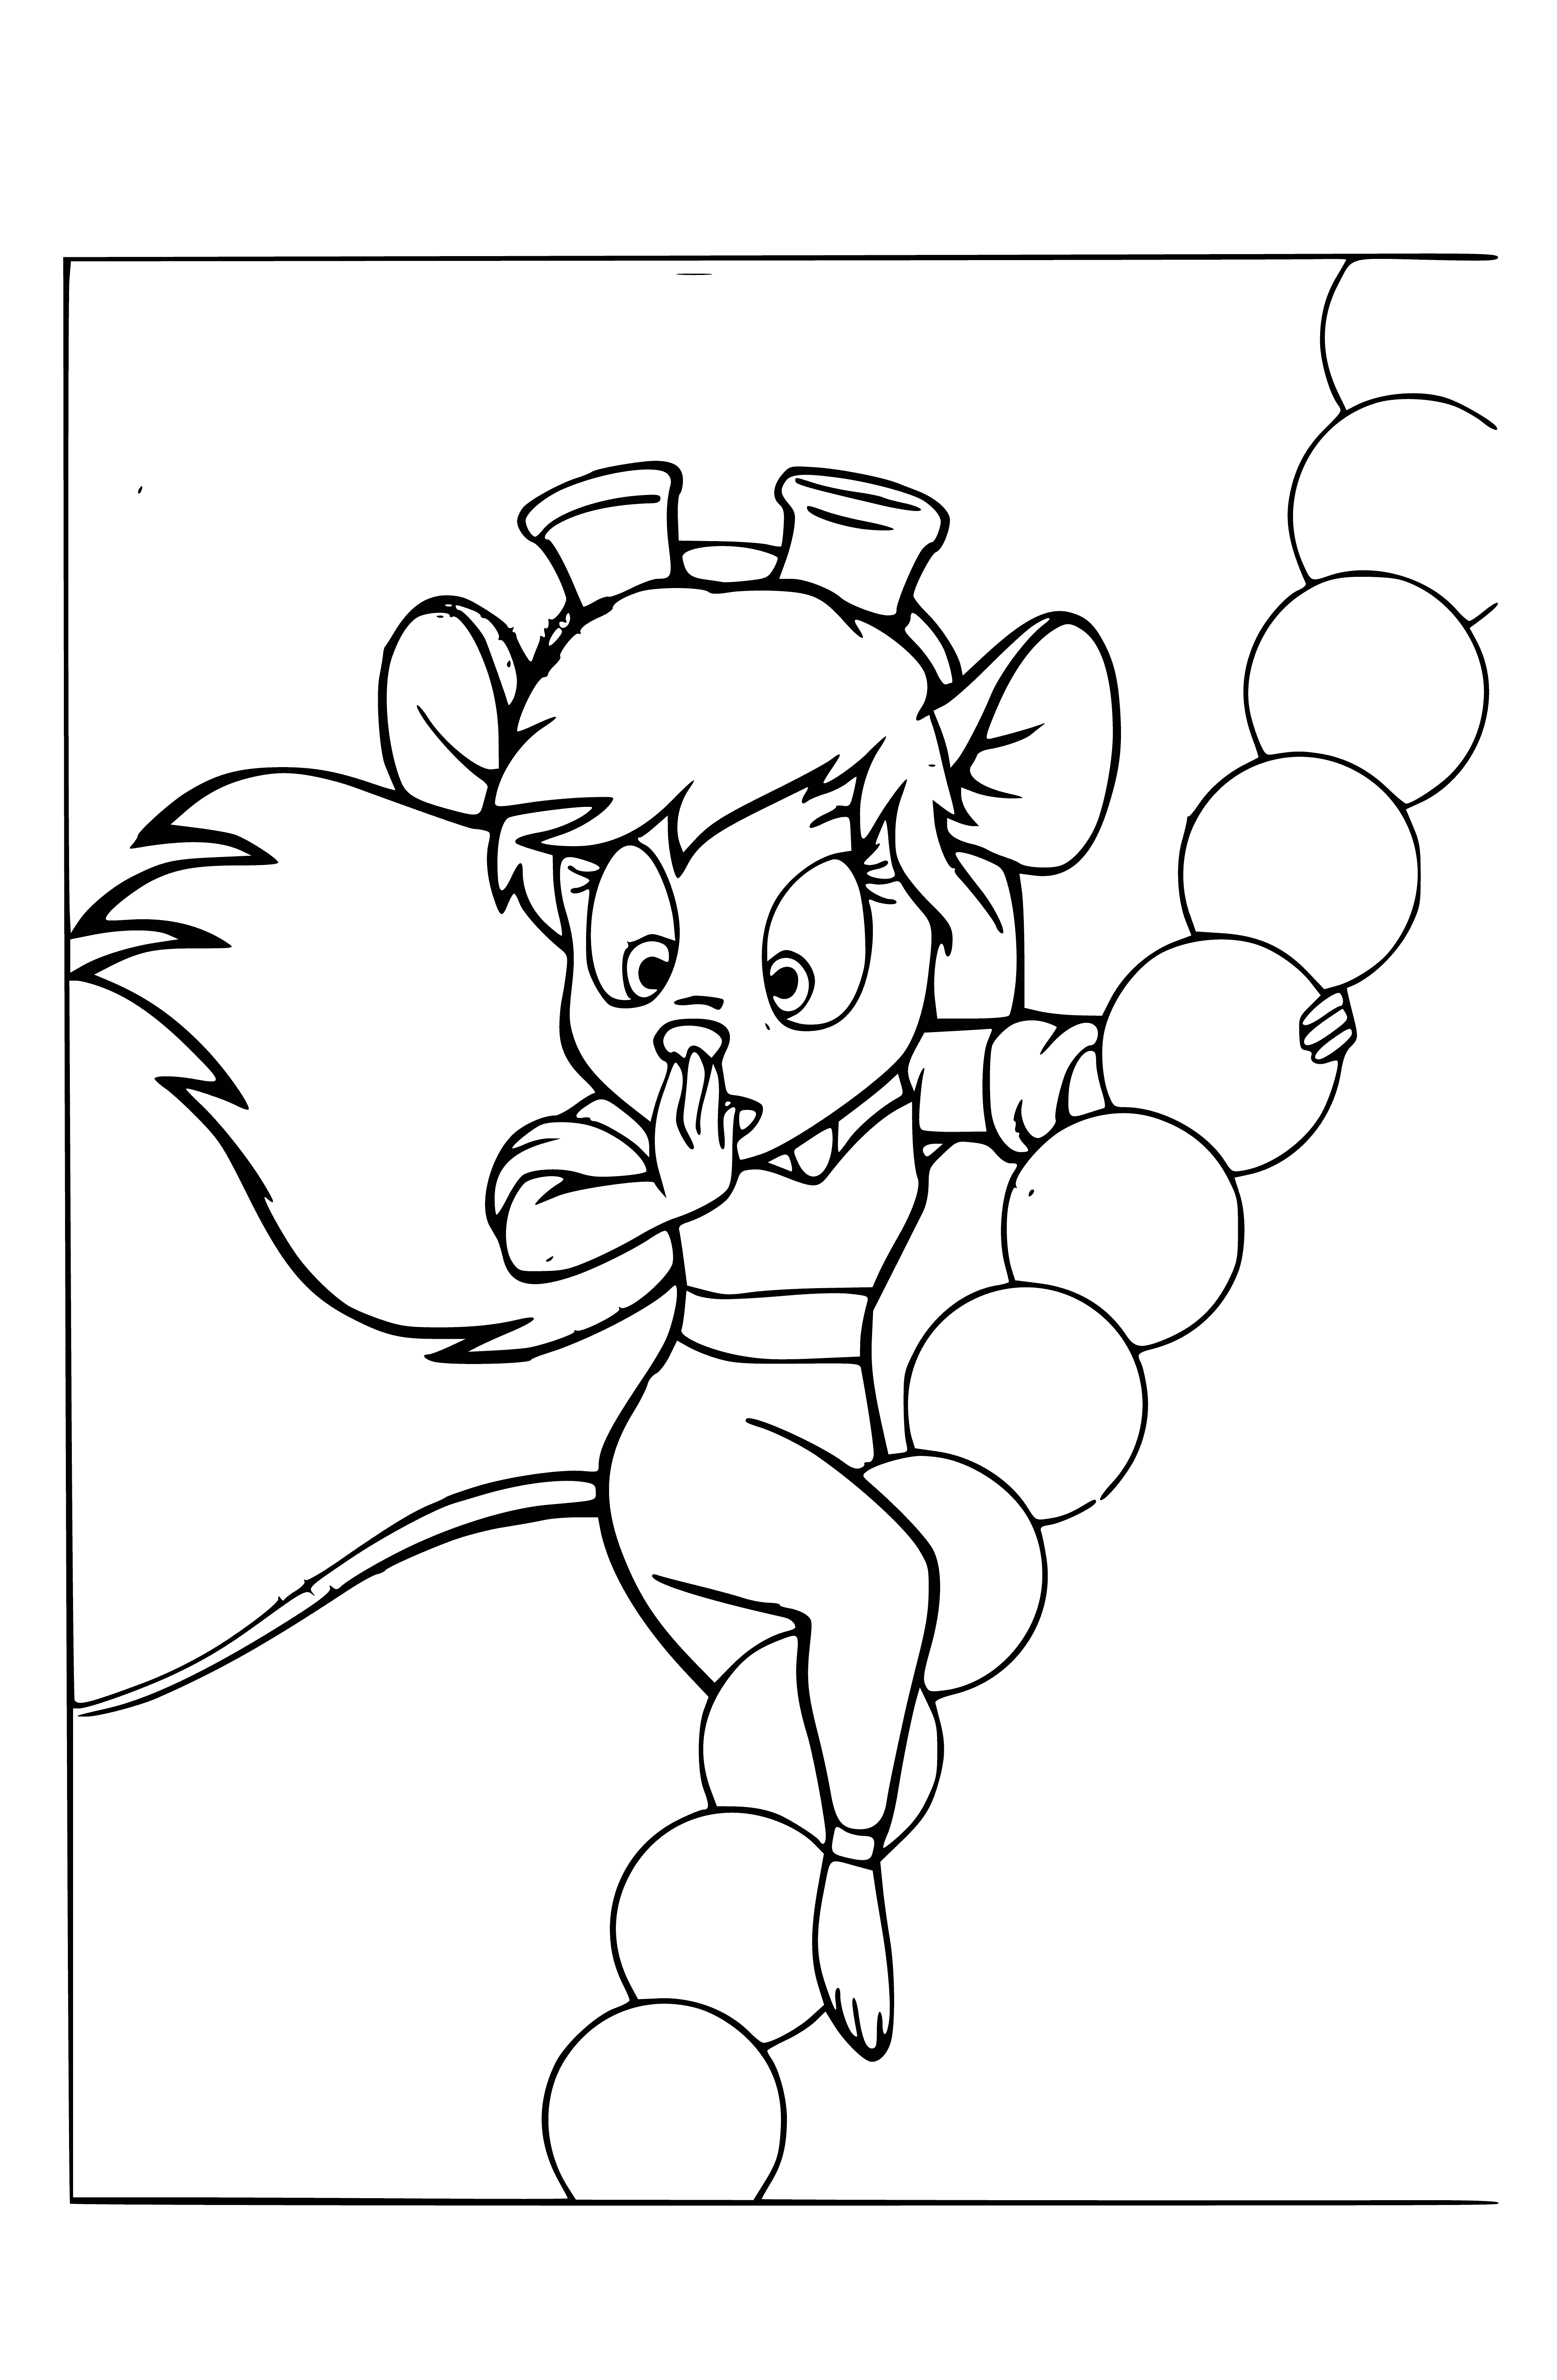 Nut on the beads coloring page